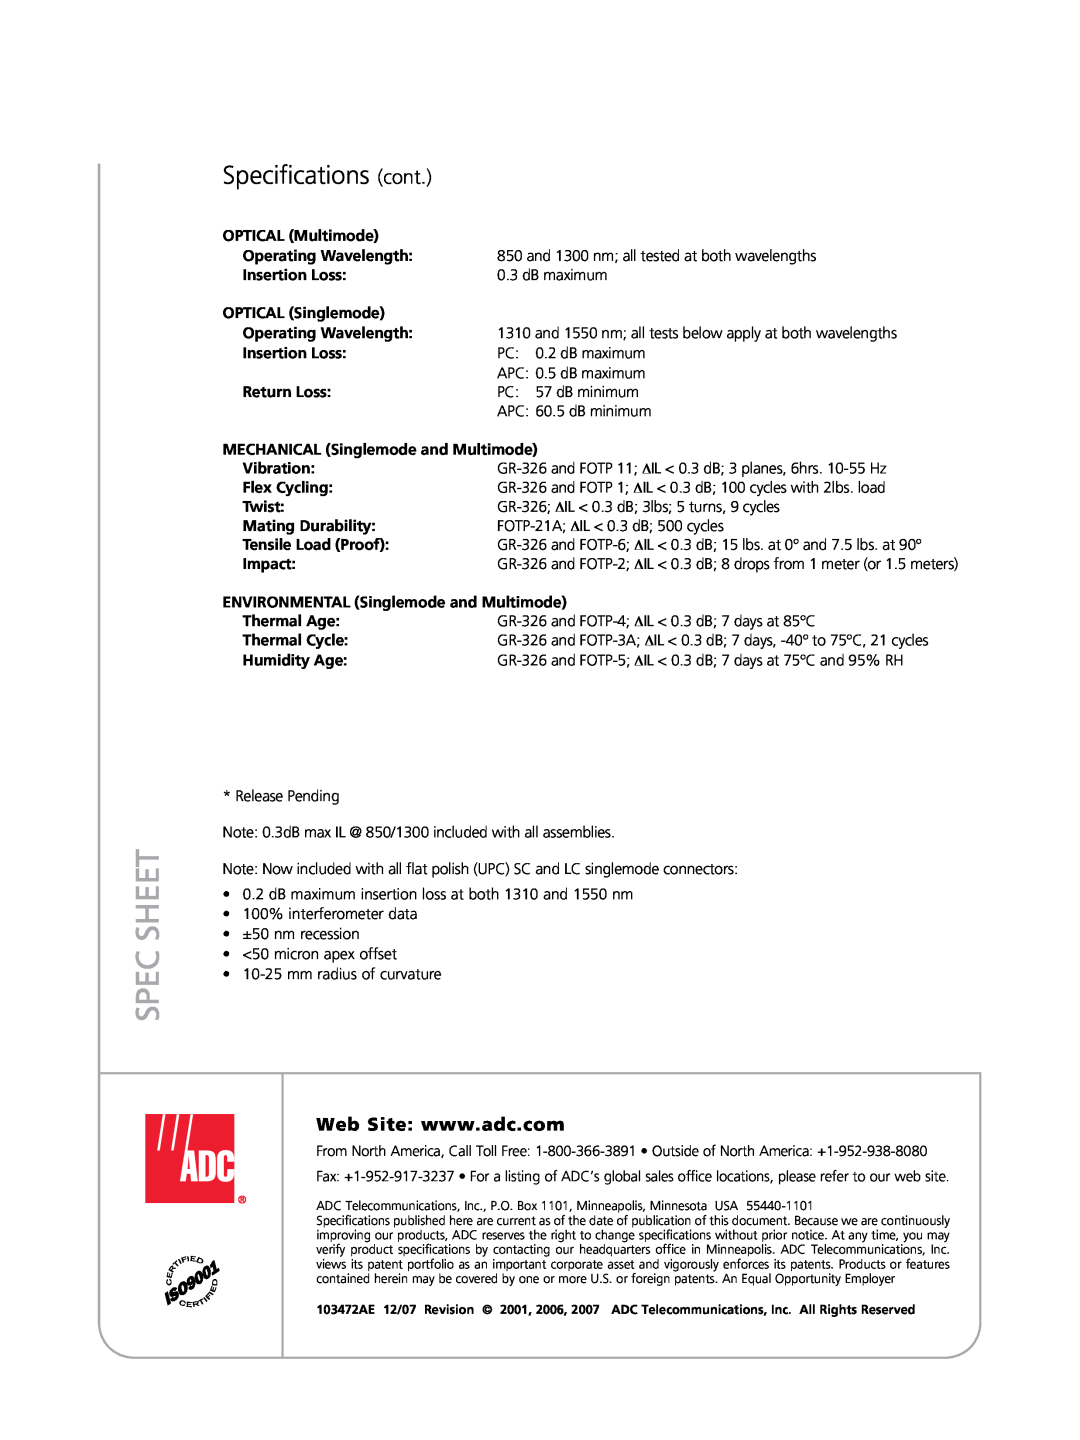 ADC TrueNet TracerLight Specifications cont, Spec Sheet, optical Multimode, Operating Wavelength, Insertion Loss, Twist 